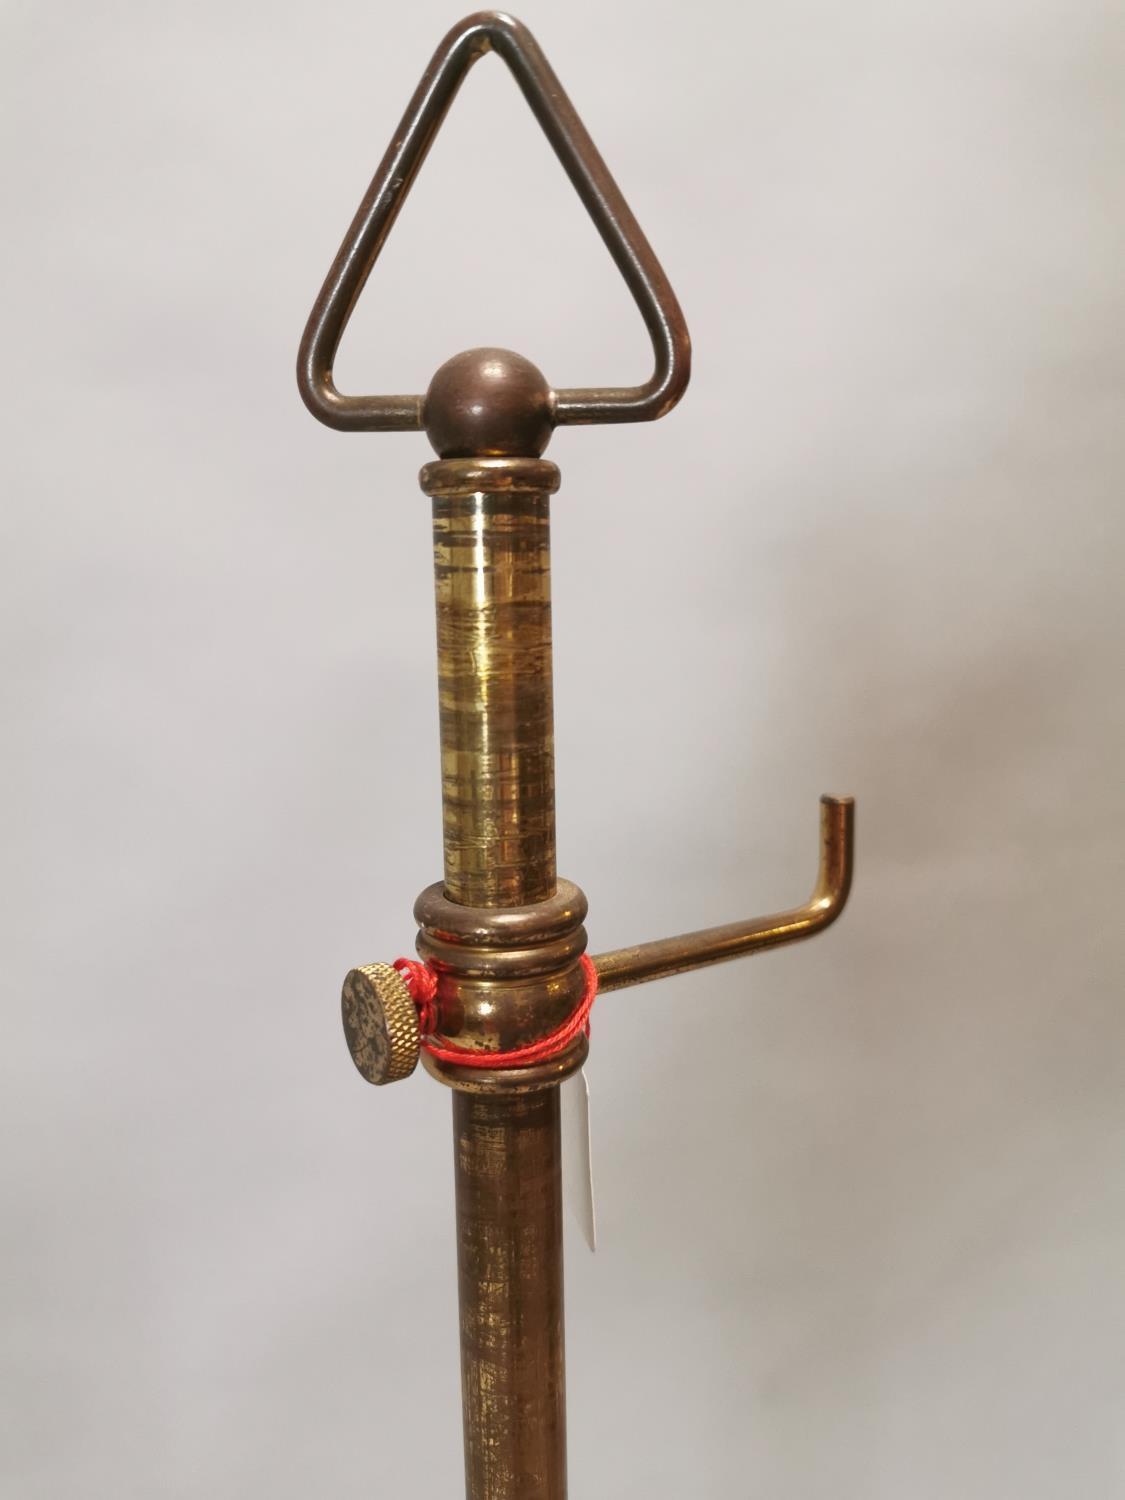 Two early 20th C. brass haberdashery shop hat stands - Image 5 of 8